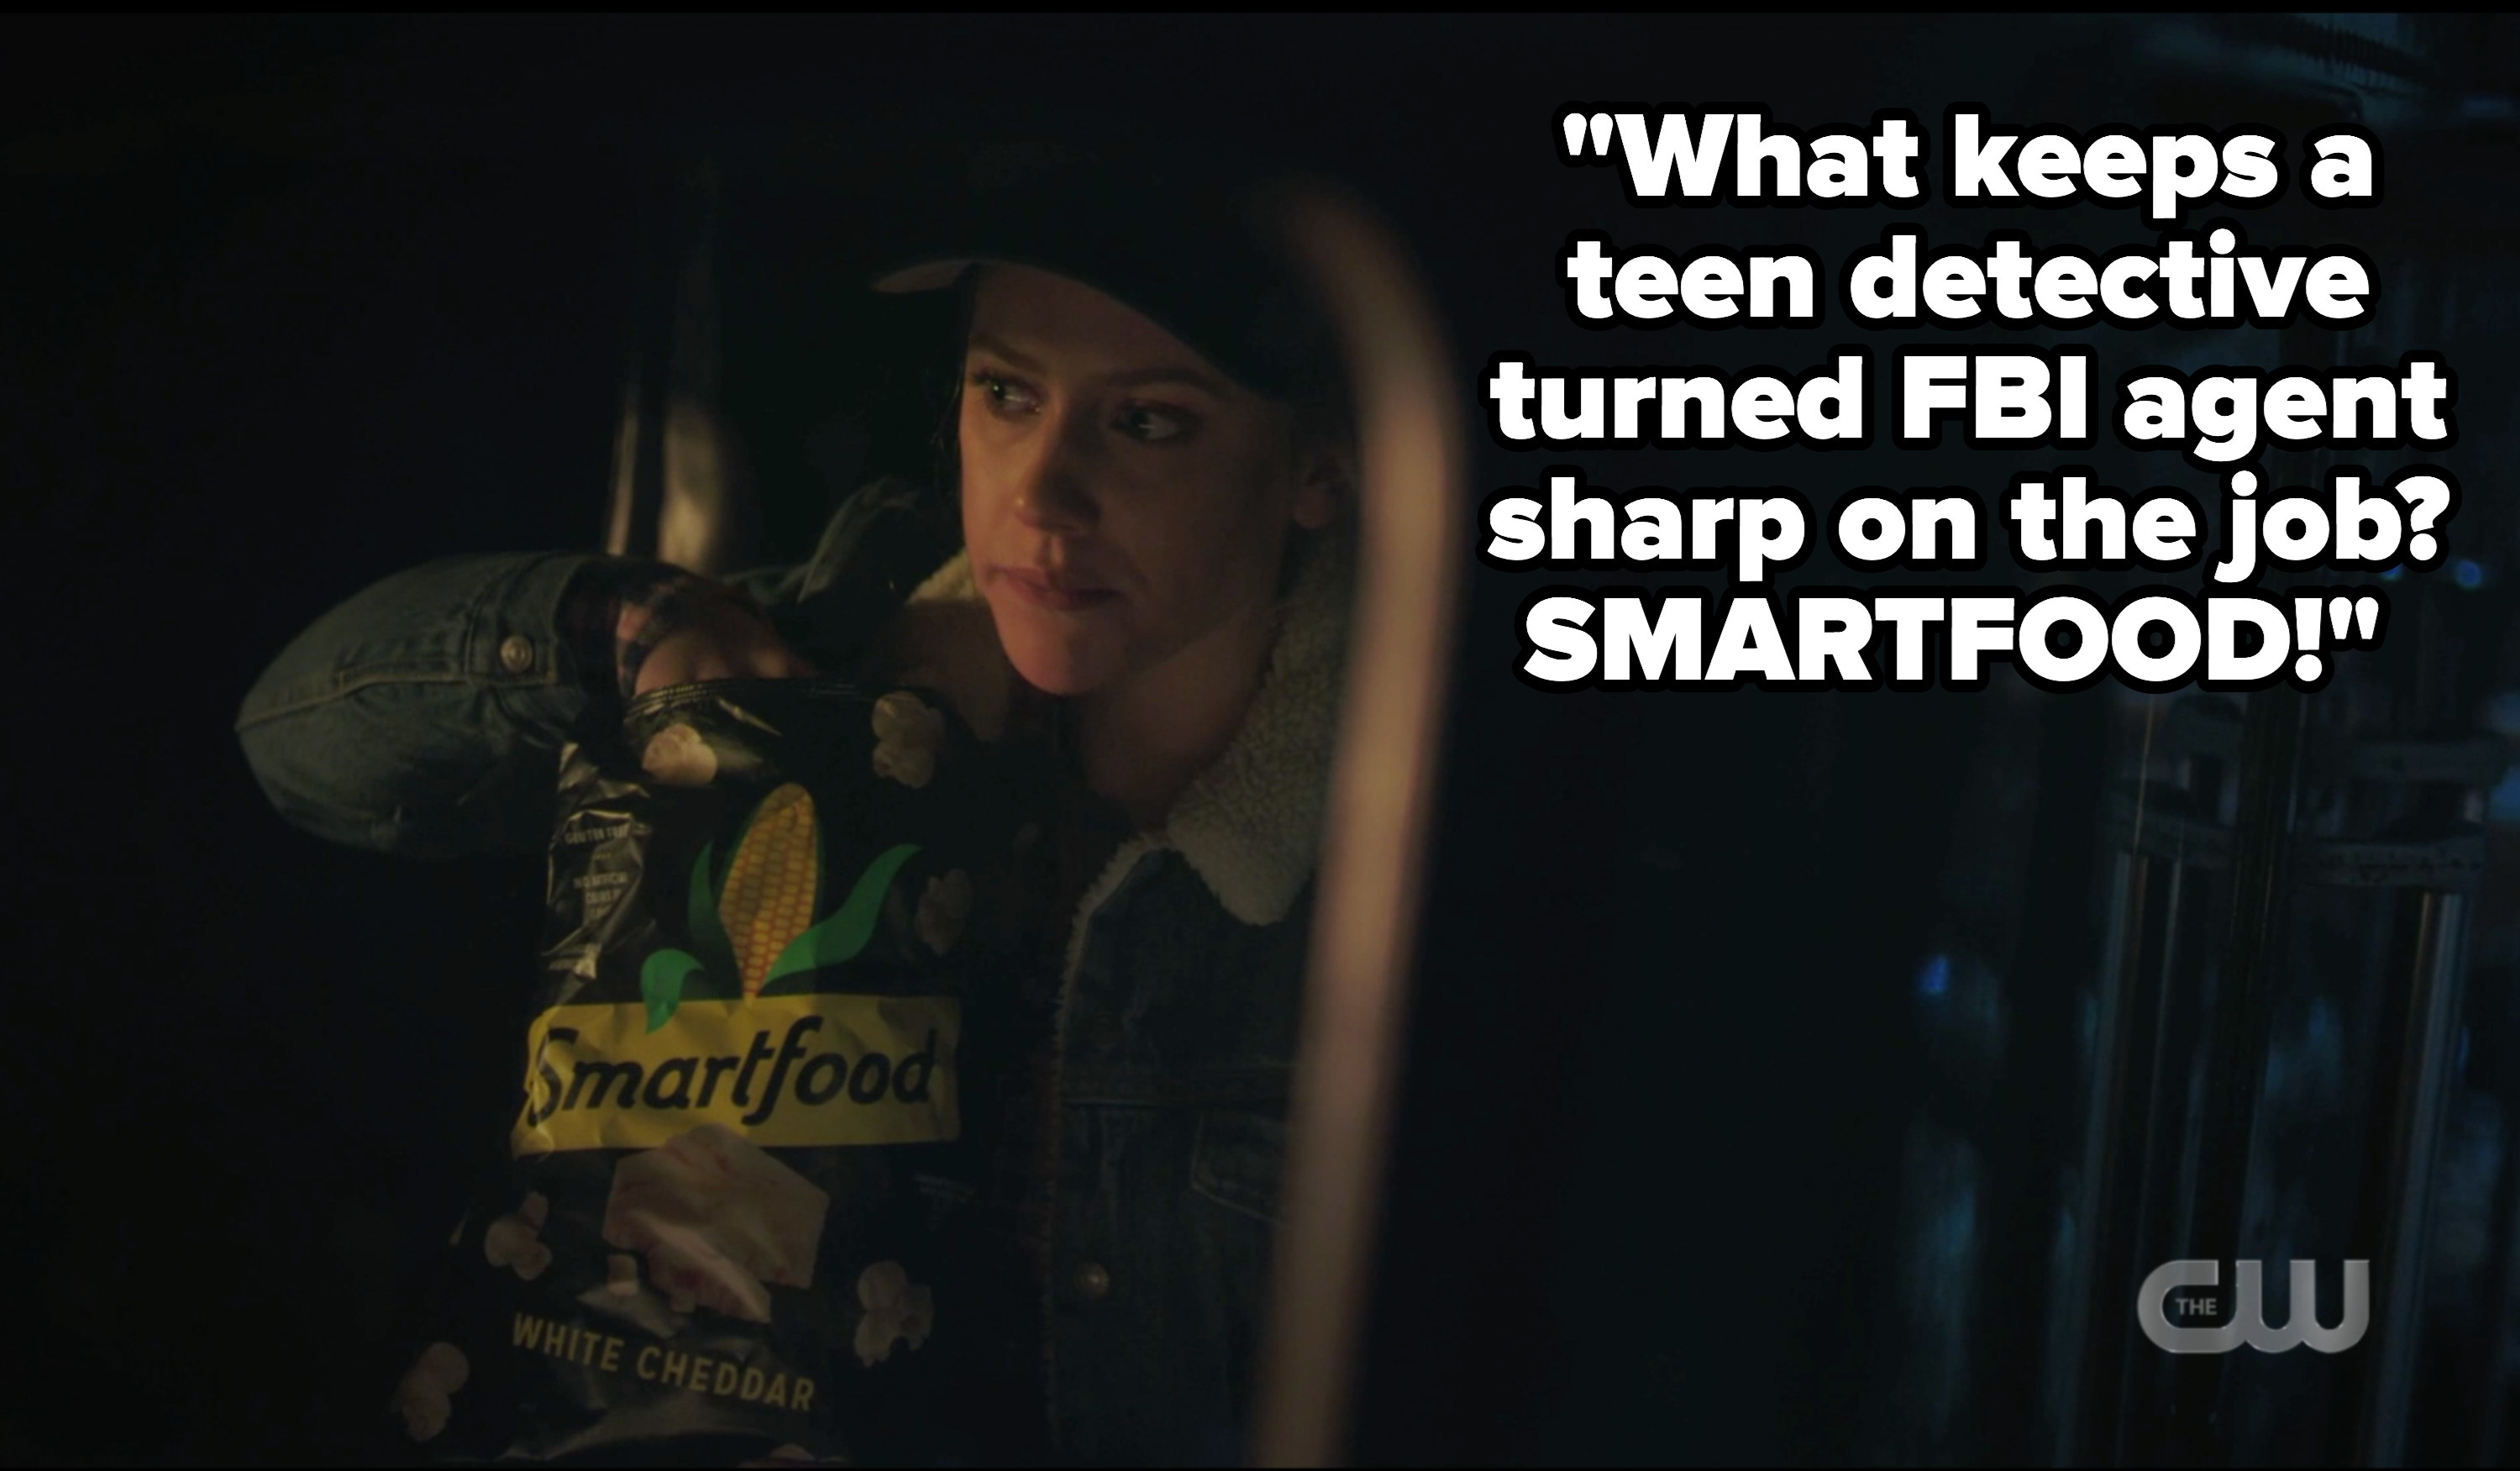 Betty eating smartfood with caption &quot;what keeps a teen detective turned FBI agent sharp on the job? Smartfood!&quot;